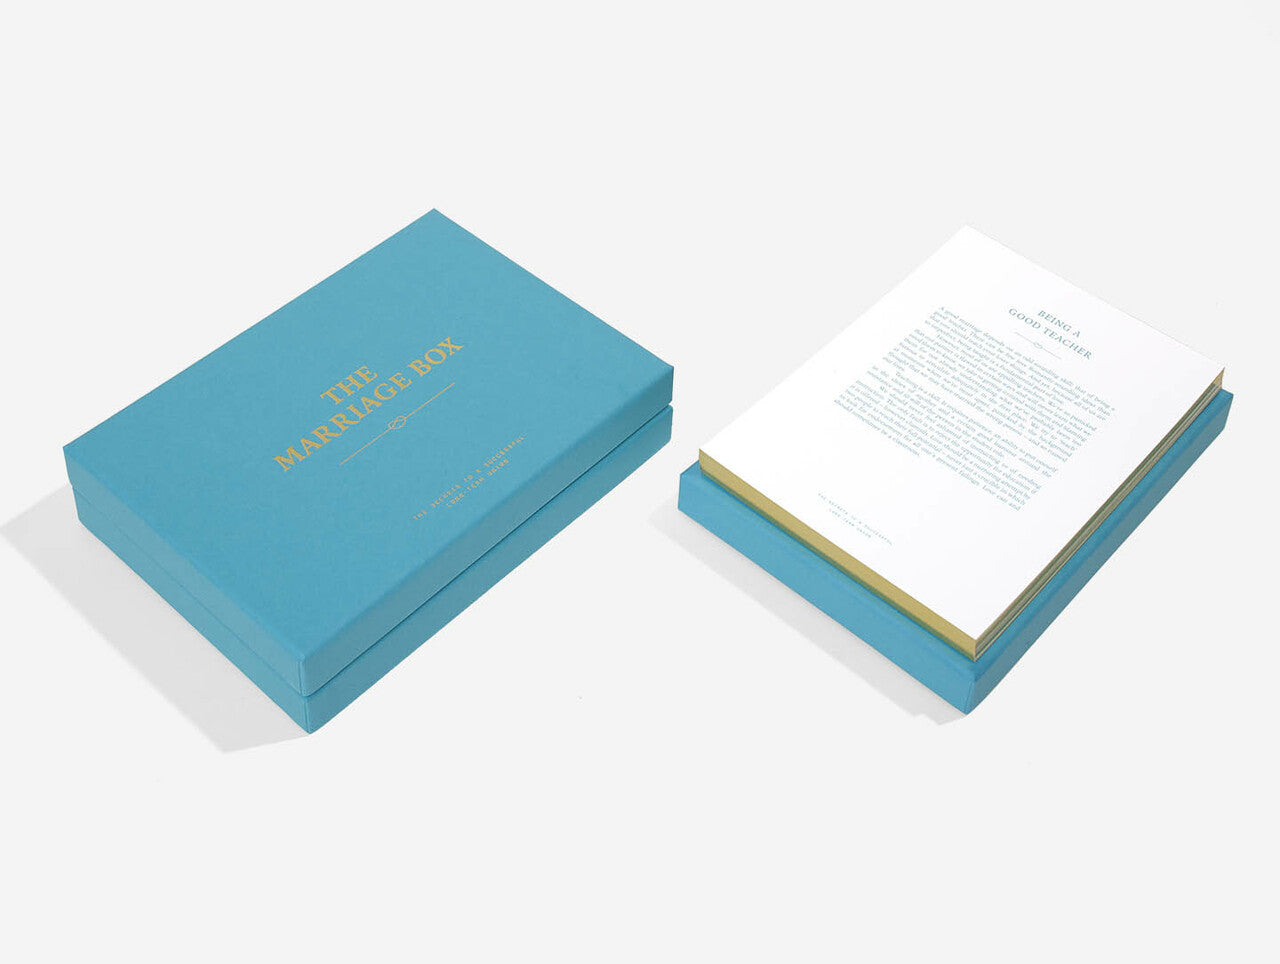 
                  
                    THE MARRIAGE BOX Card Set
                  
                